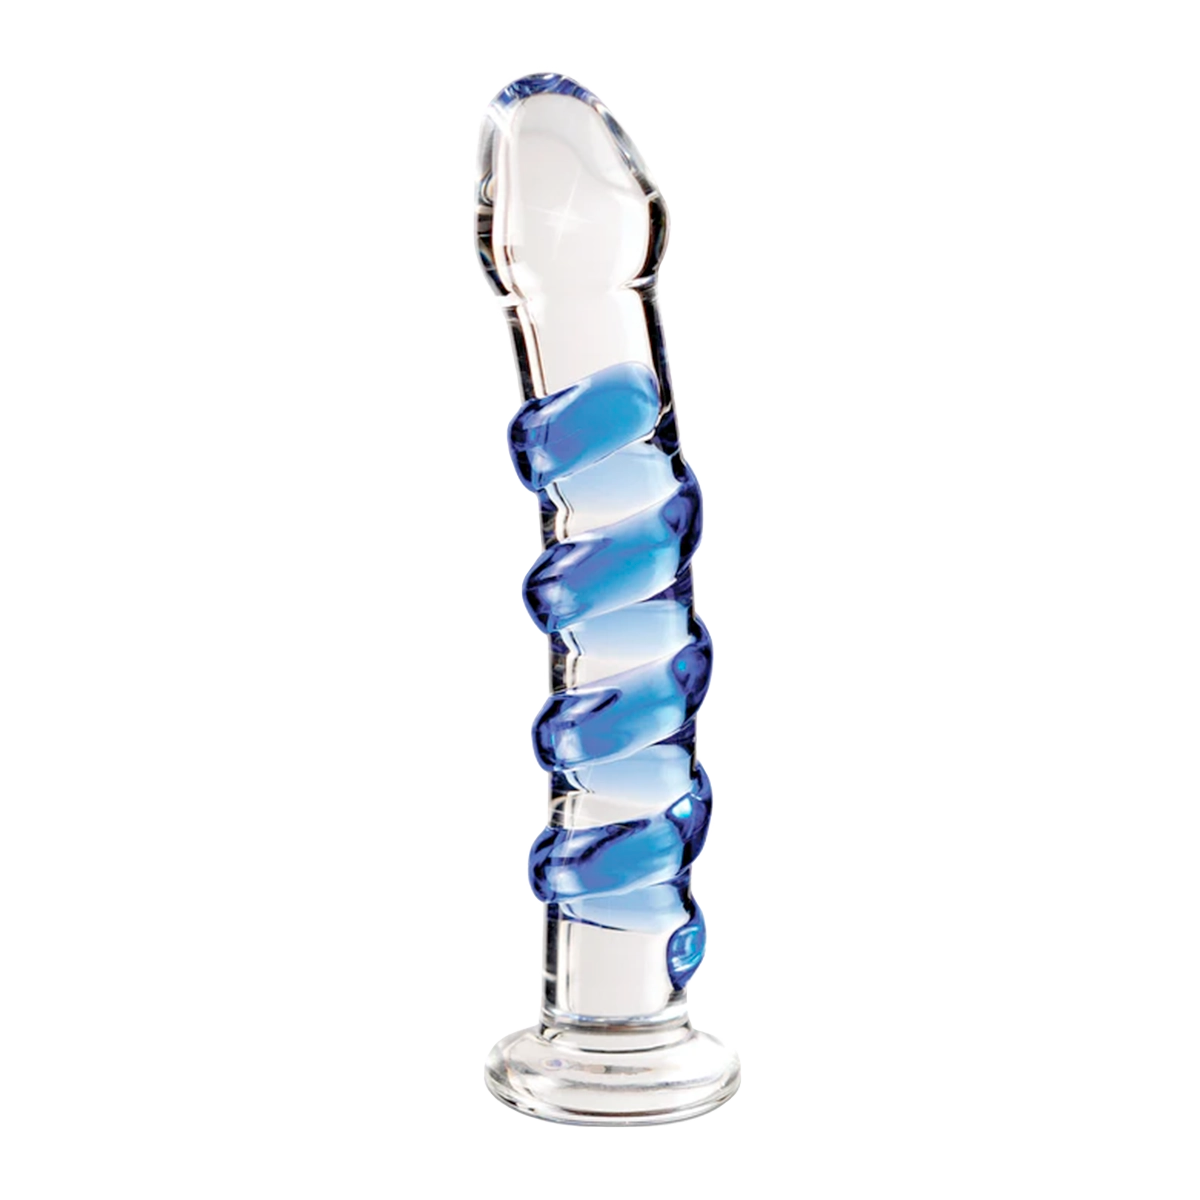 Glass Dildo's available at Matilda's